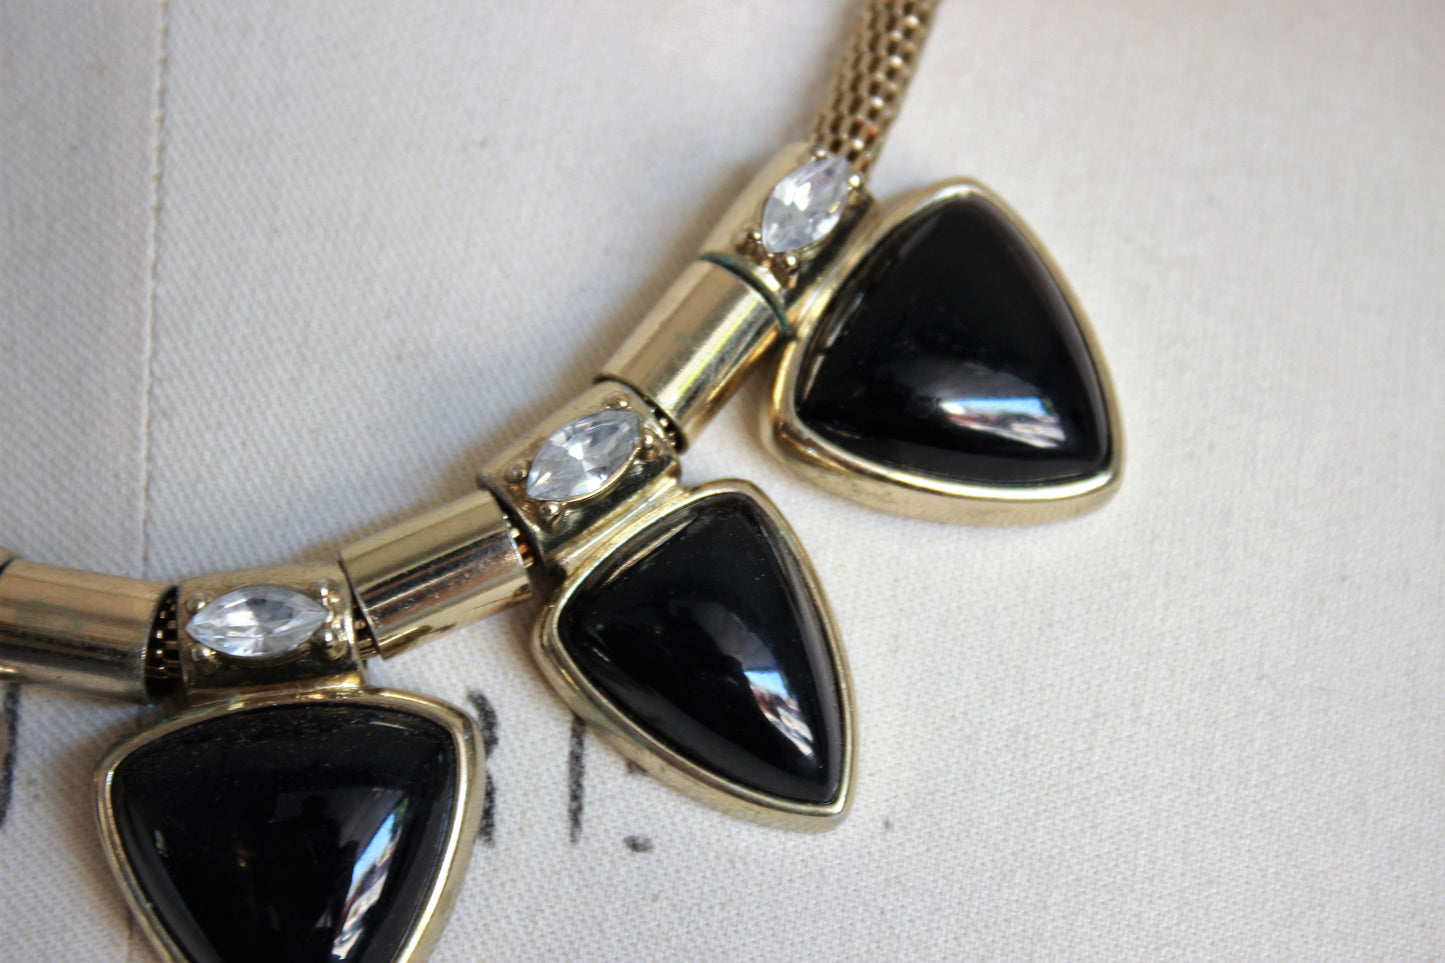 Vintage 1990s Black Glass, Rhinestones, and Snake Chain Necklace